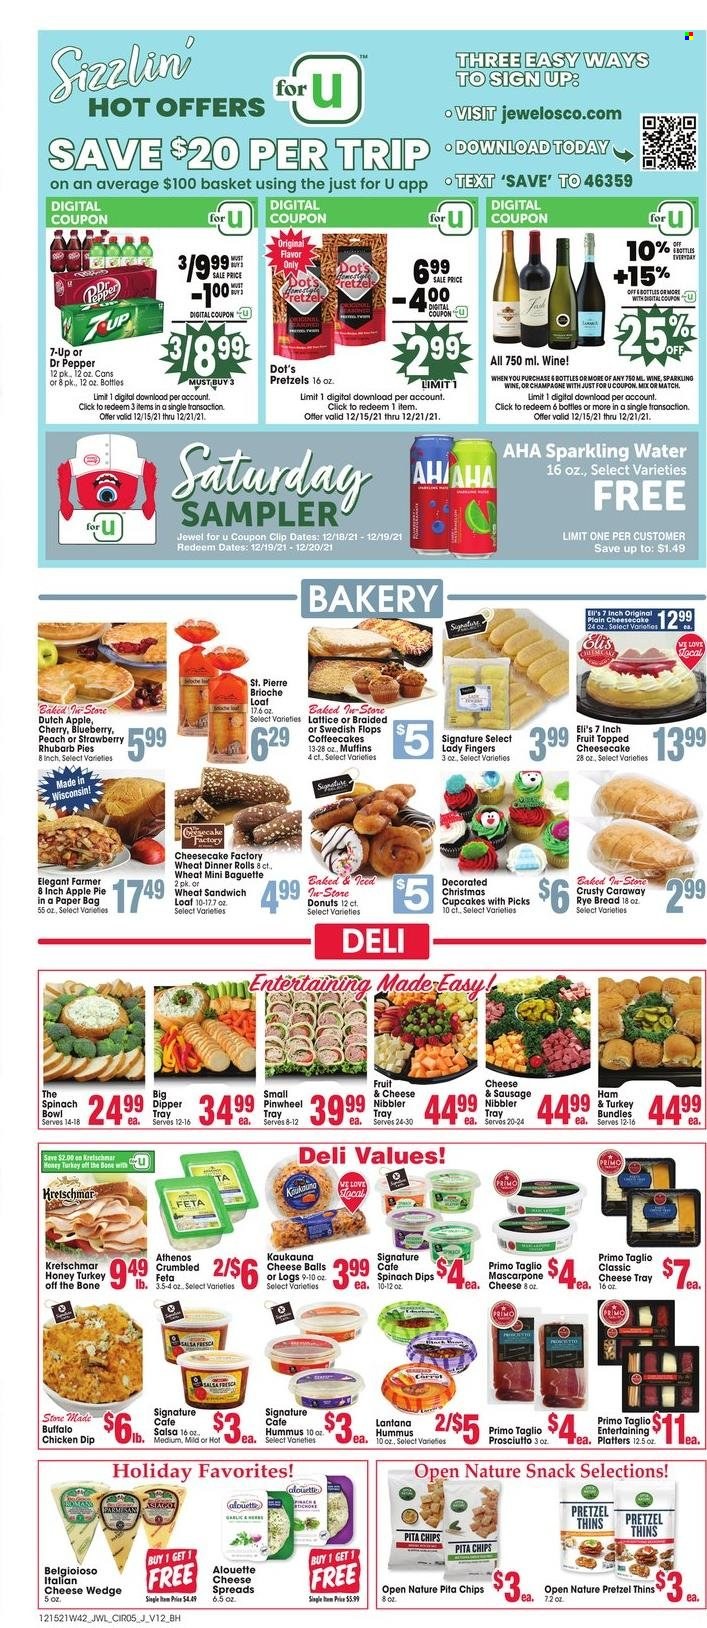 thumbnail - Jewel Osco Flyer - 12/15/2021 - 12/21/2021 - Sales products - baguette, bread, pretzels, dinner rolls, brioche, apple pie, cupcake, cheesecake, donut, muffin, coffee cake, rhubarb, sandwich, ham, prosciutto, hummus, mascarpone, feta, spinach dip, lady fingers, snack, chips, Thins, pita chips, salsa, honey, Dr. Pepper, 7UP, sparkling water, tea, sparkling wine, wine, paper bag. Page 5.